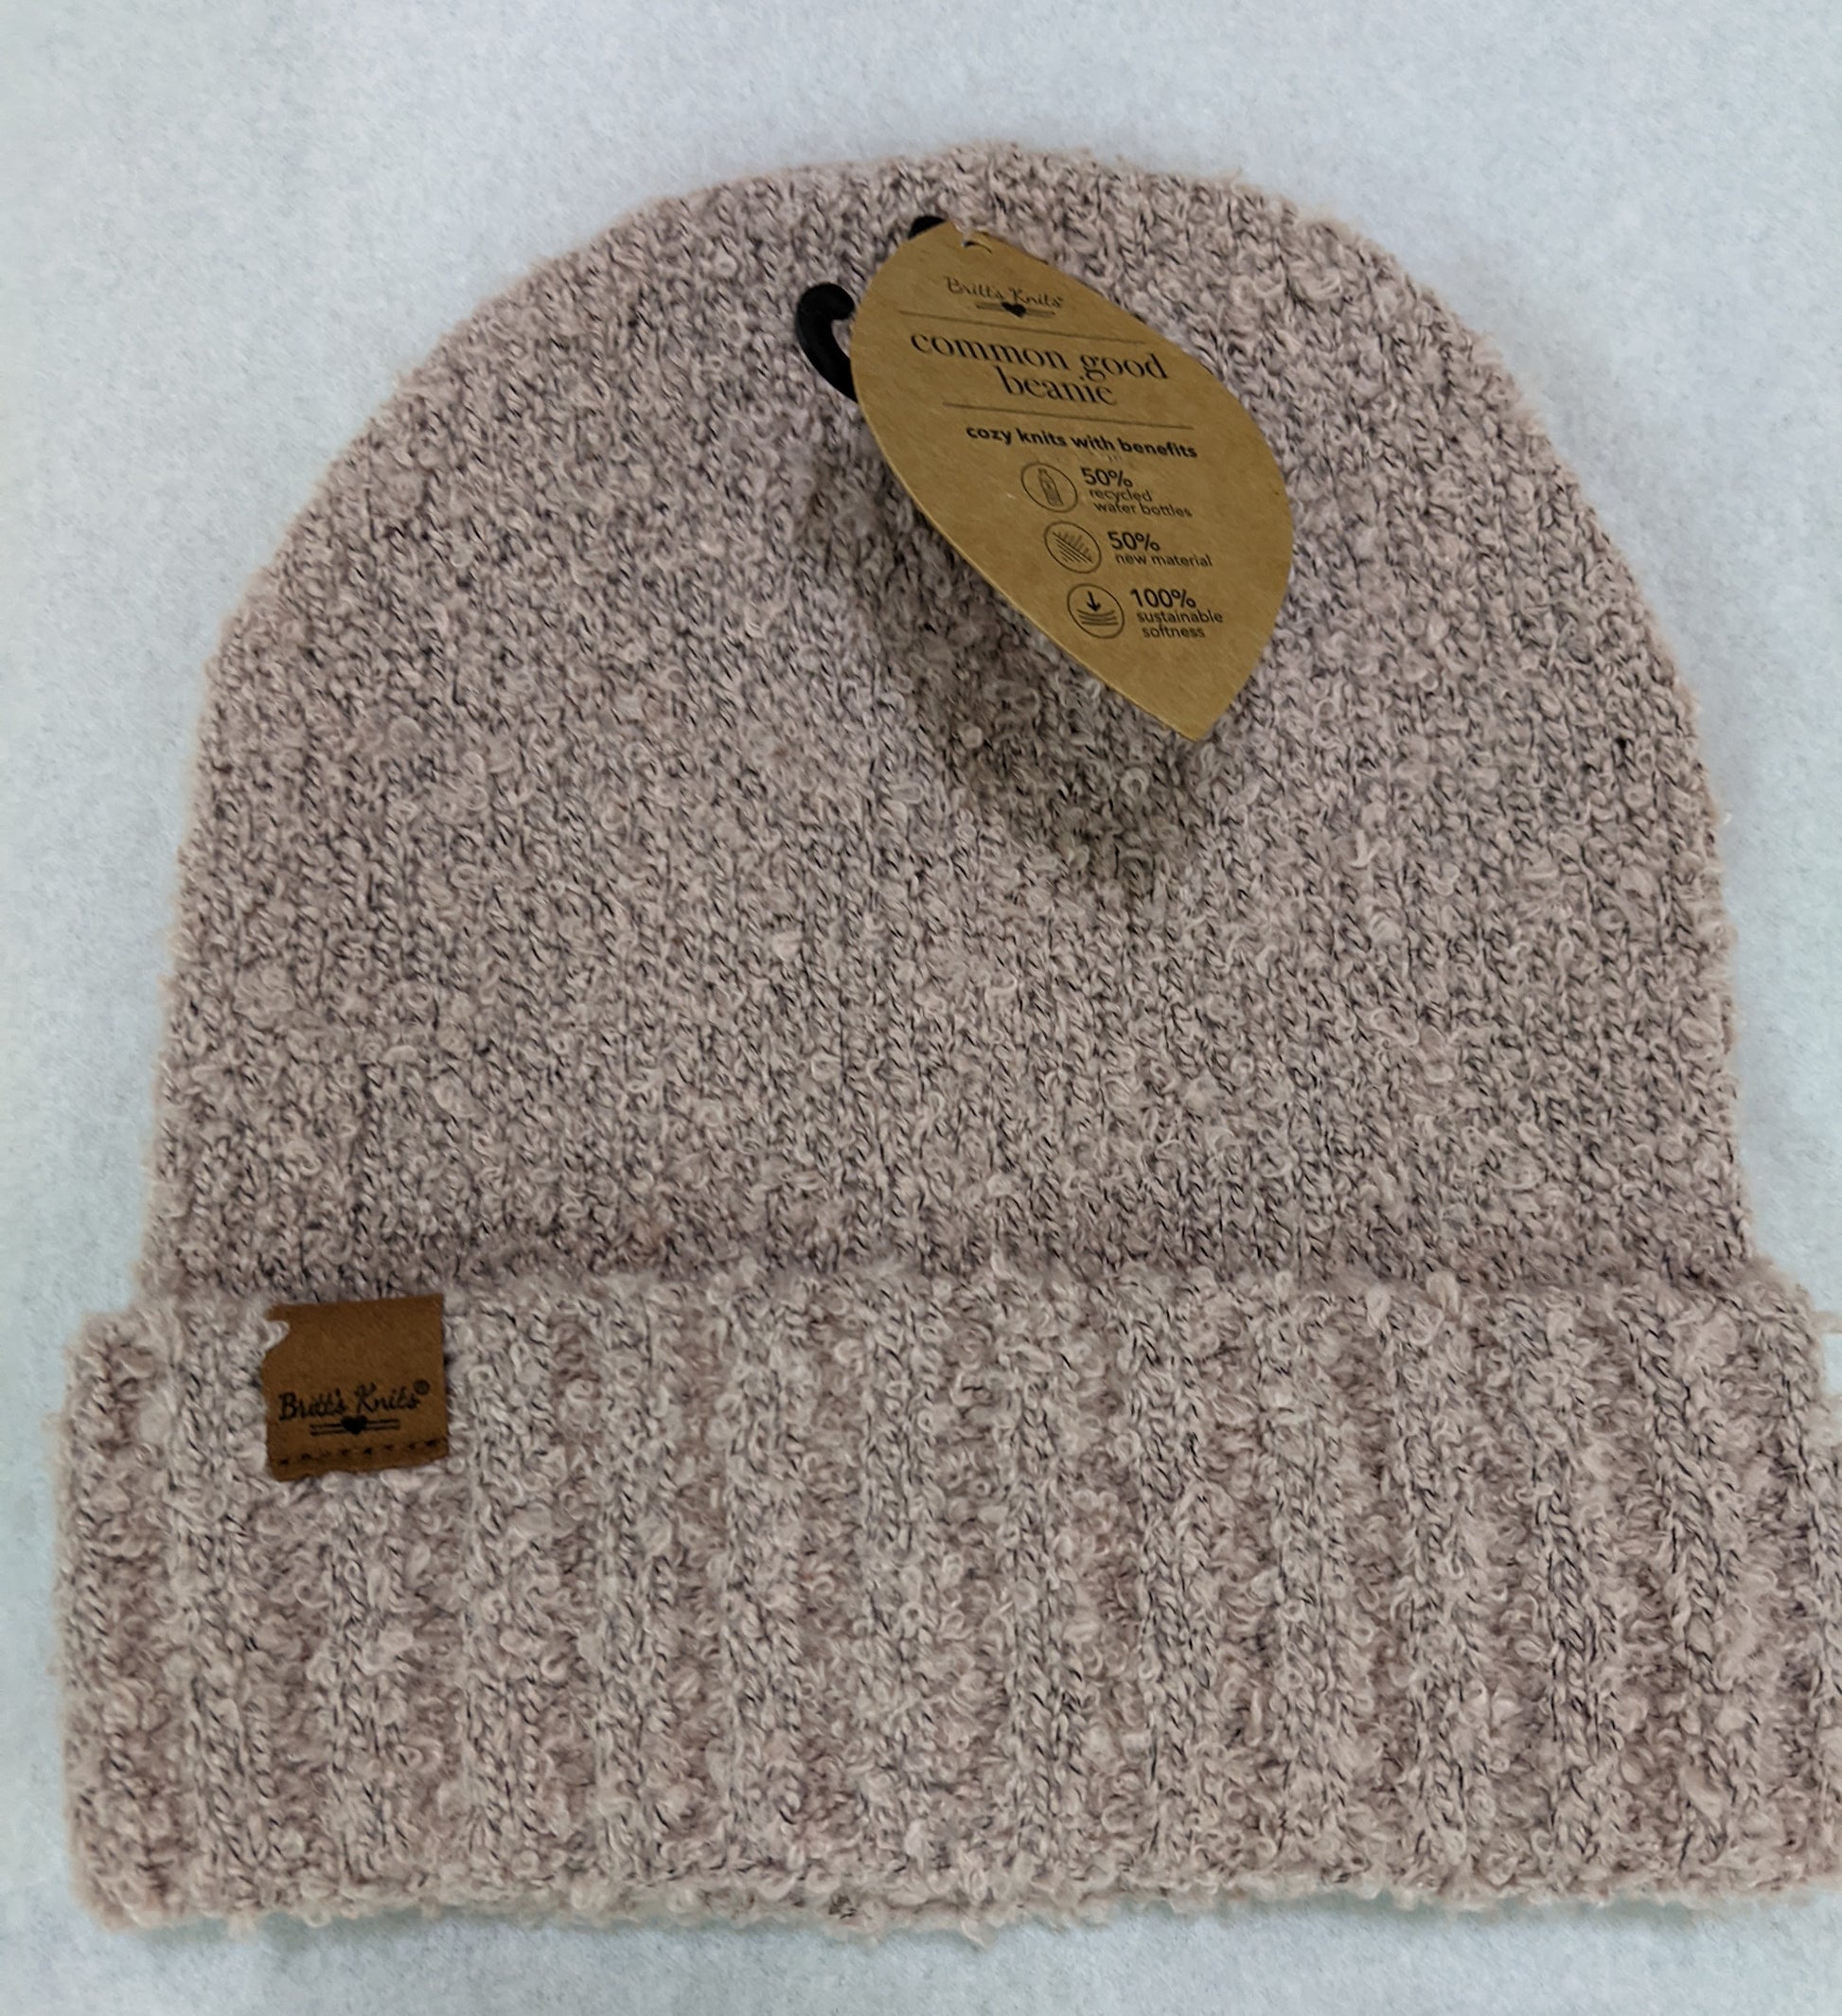 Britt's Knits Common Good Recycled Beanie